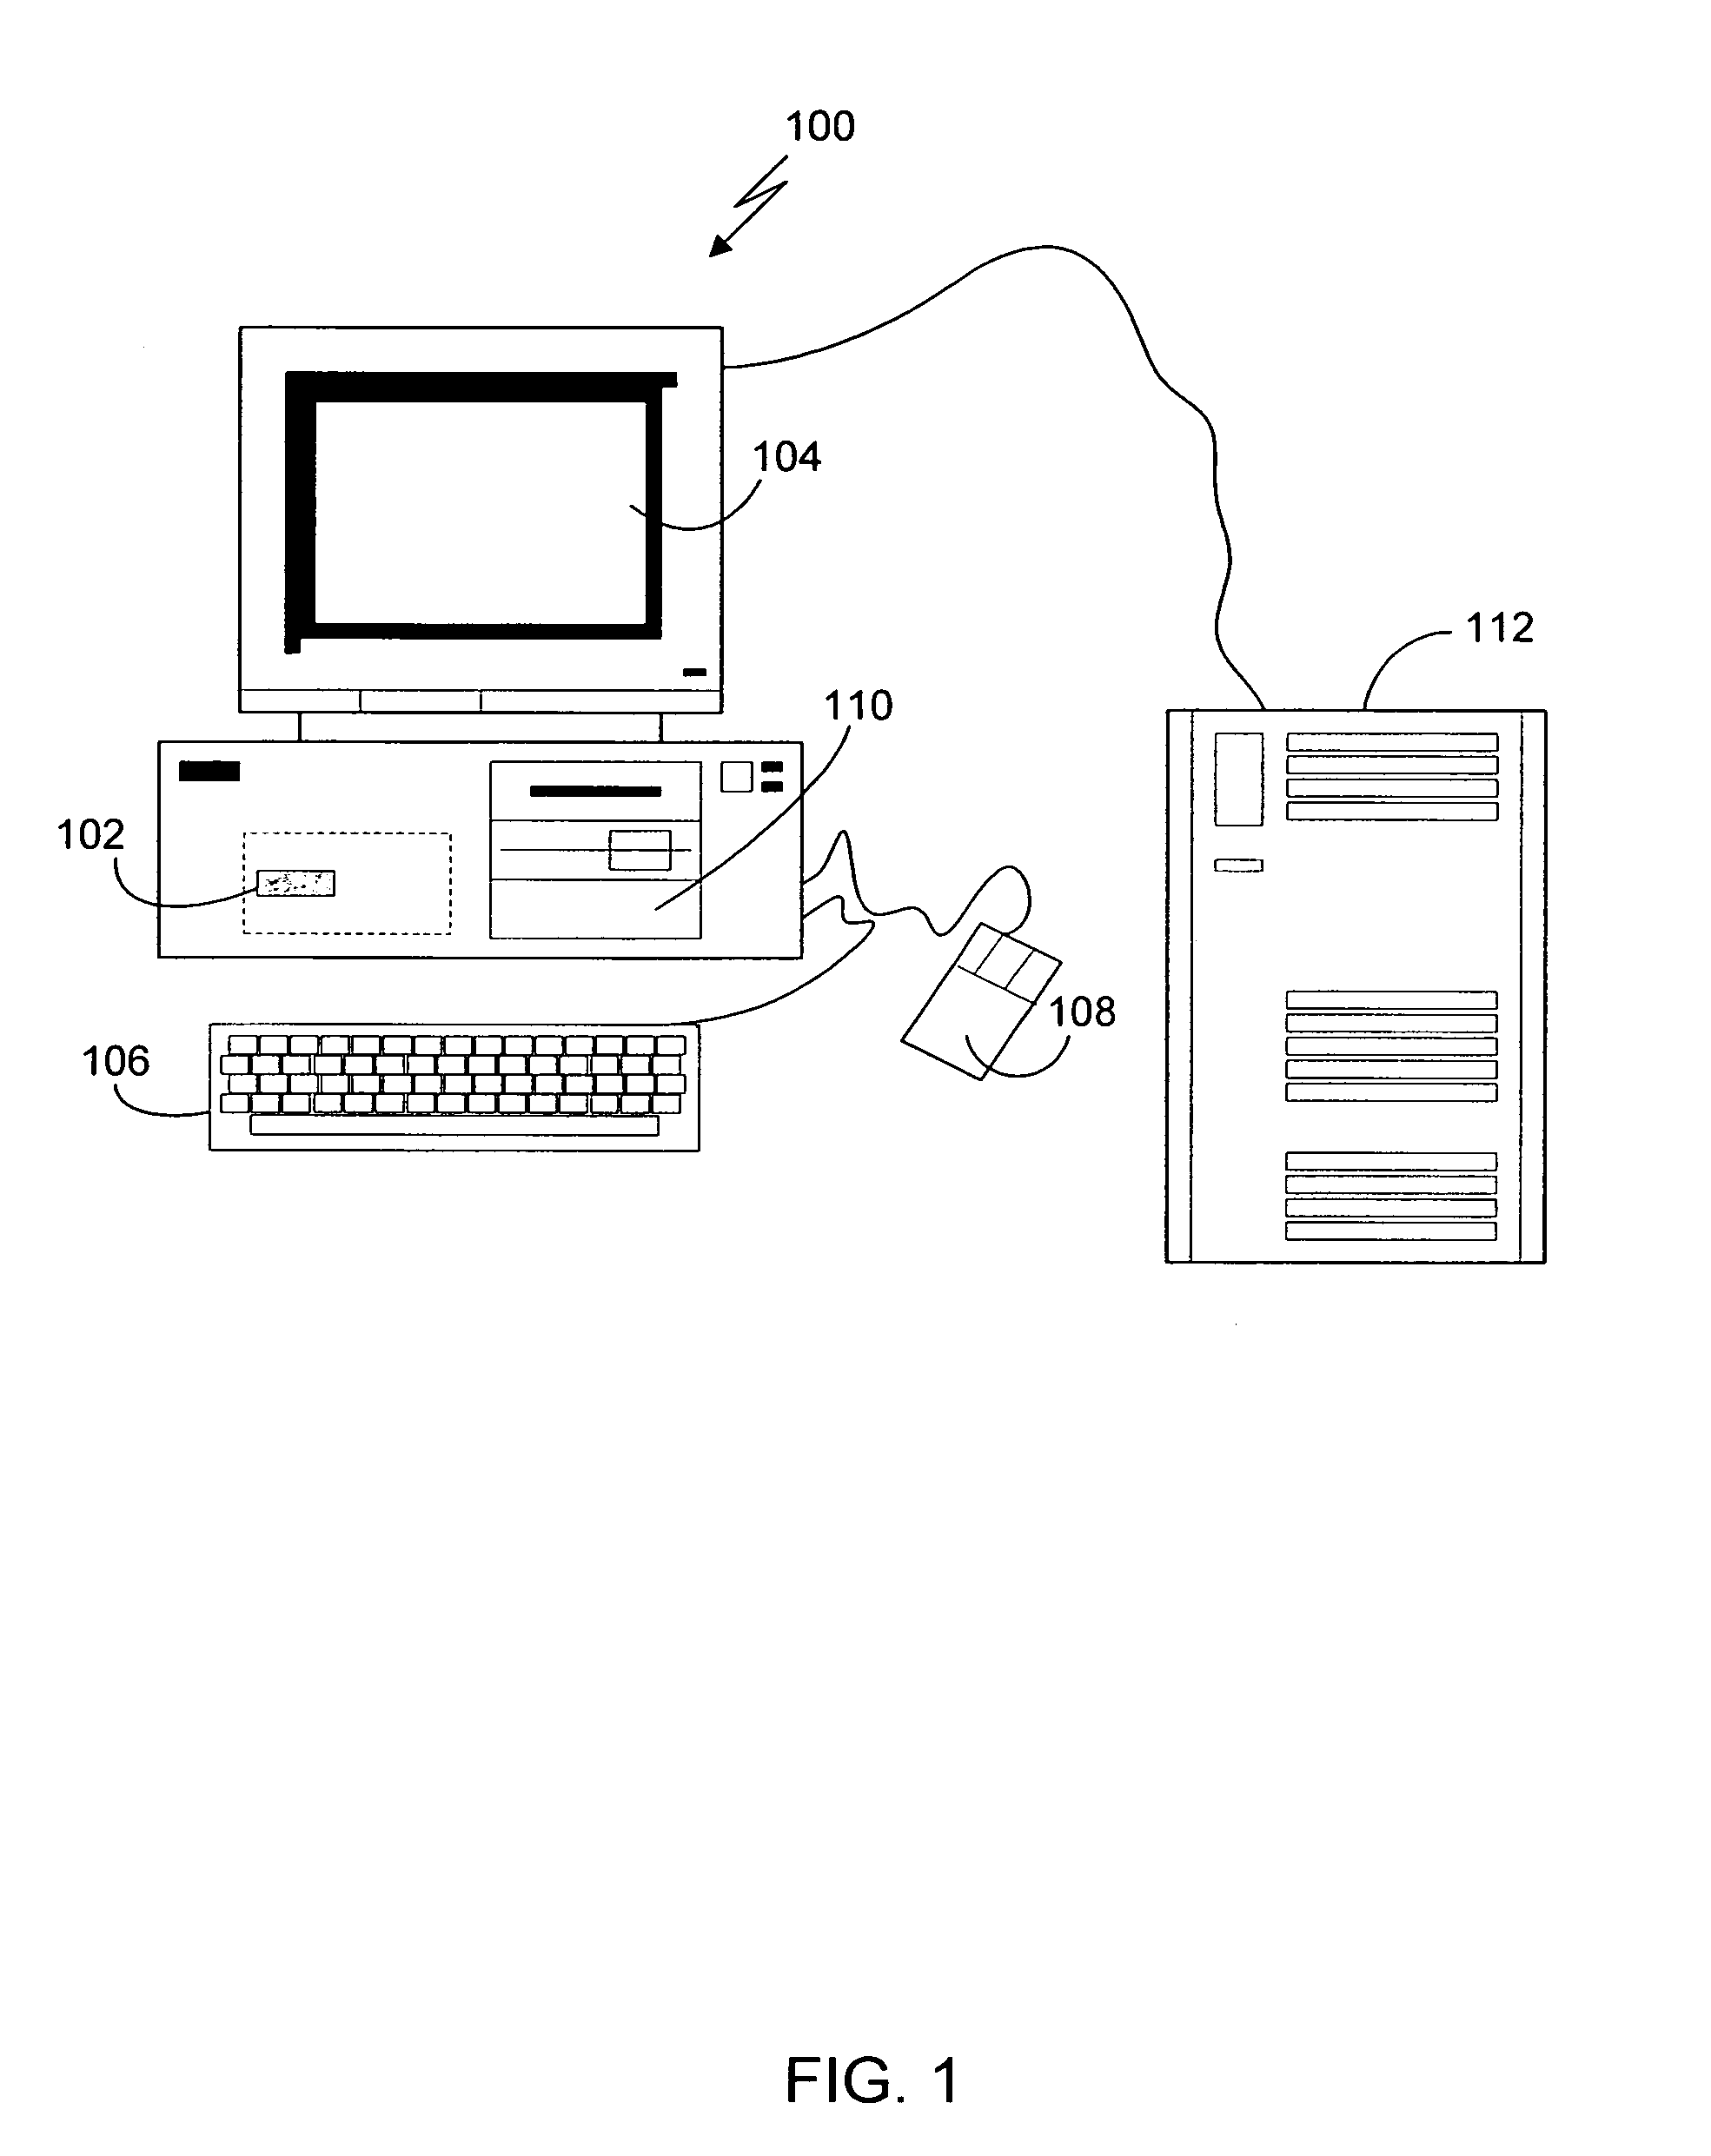 Automated connections of computer-aided design components